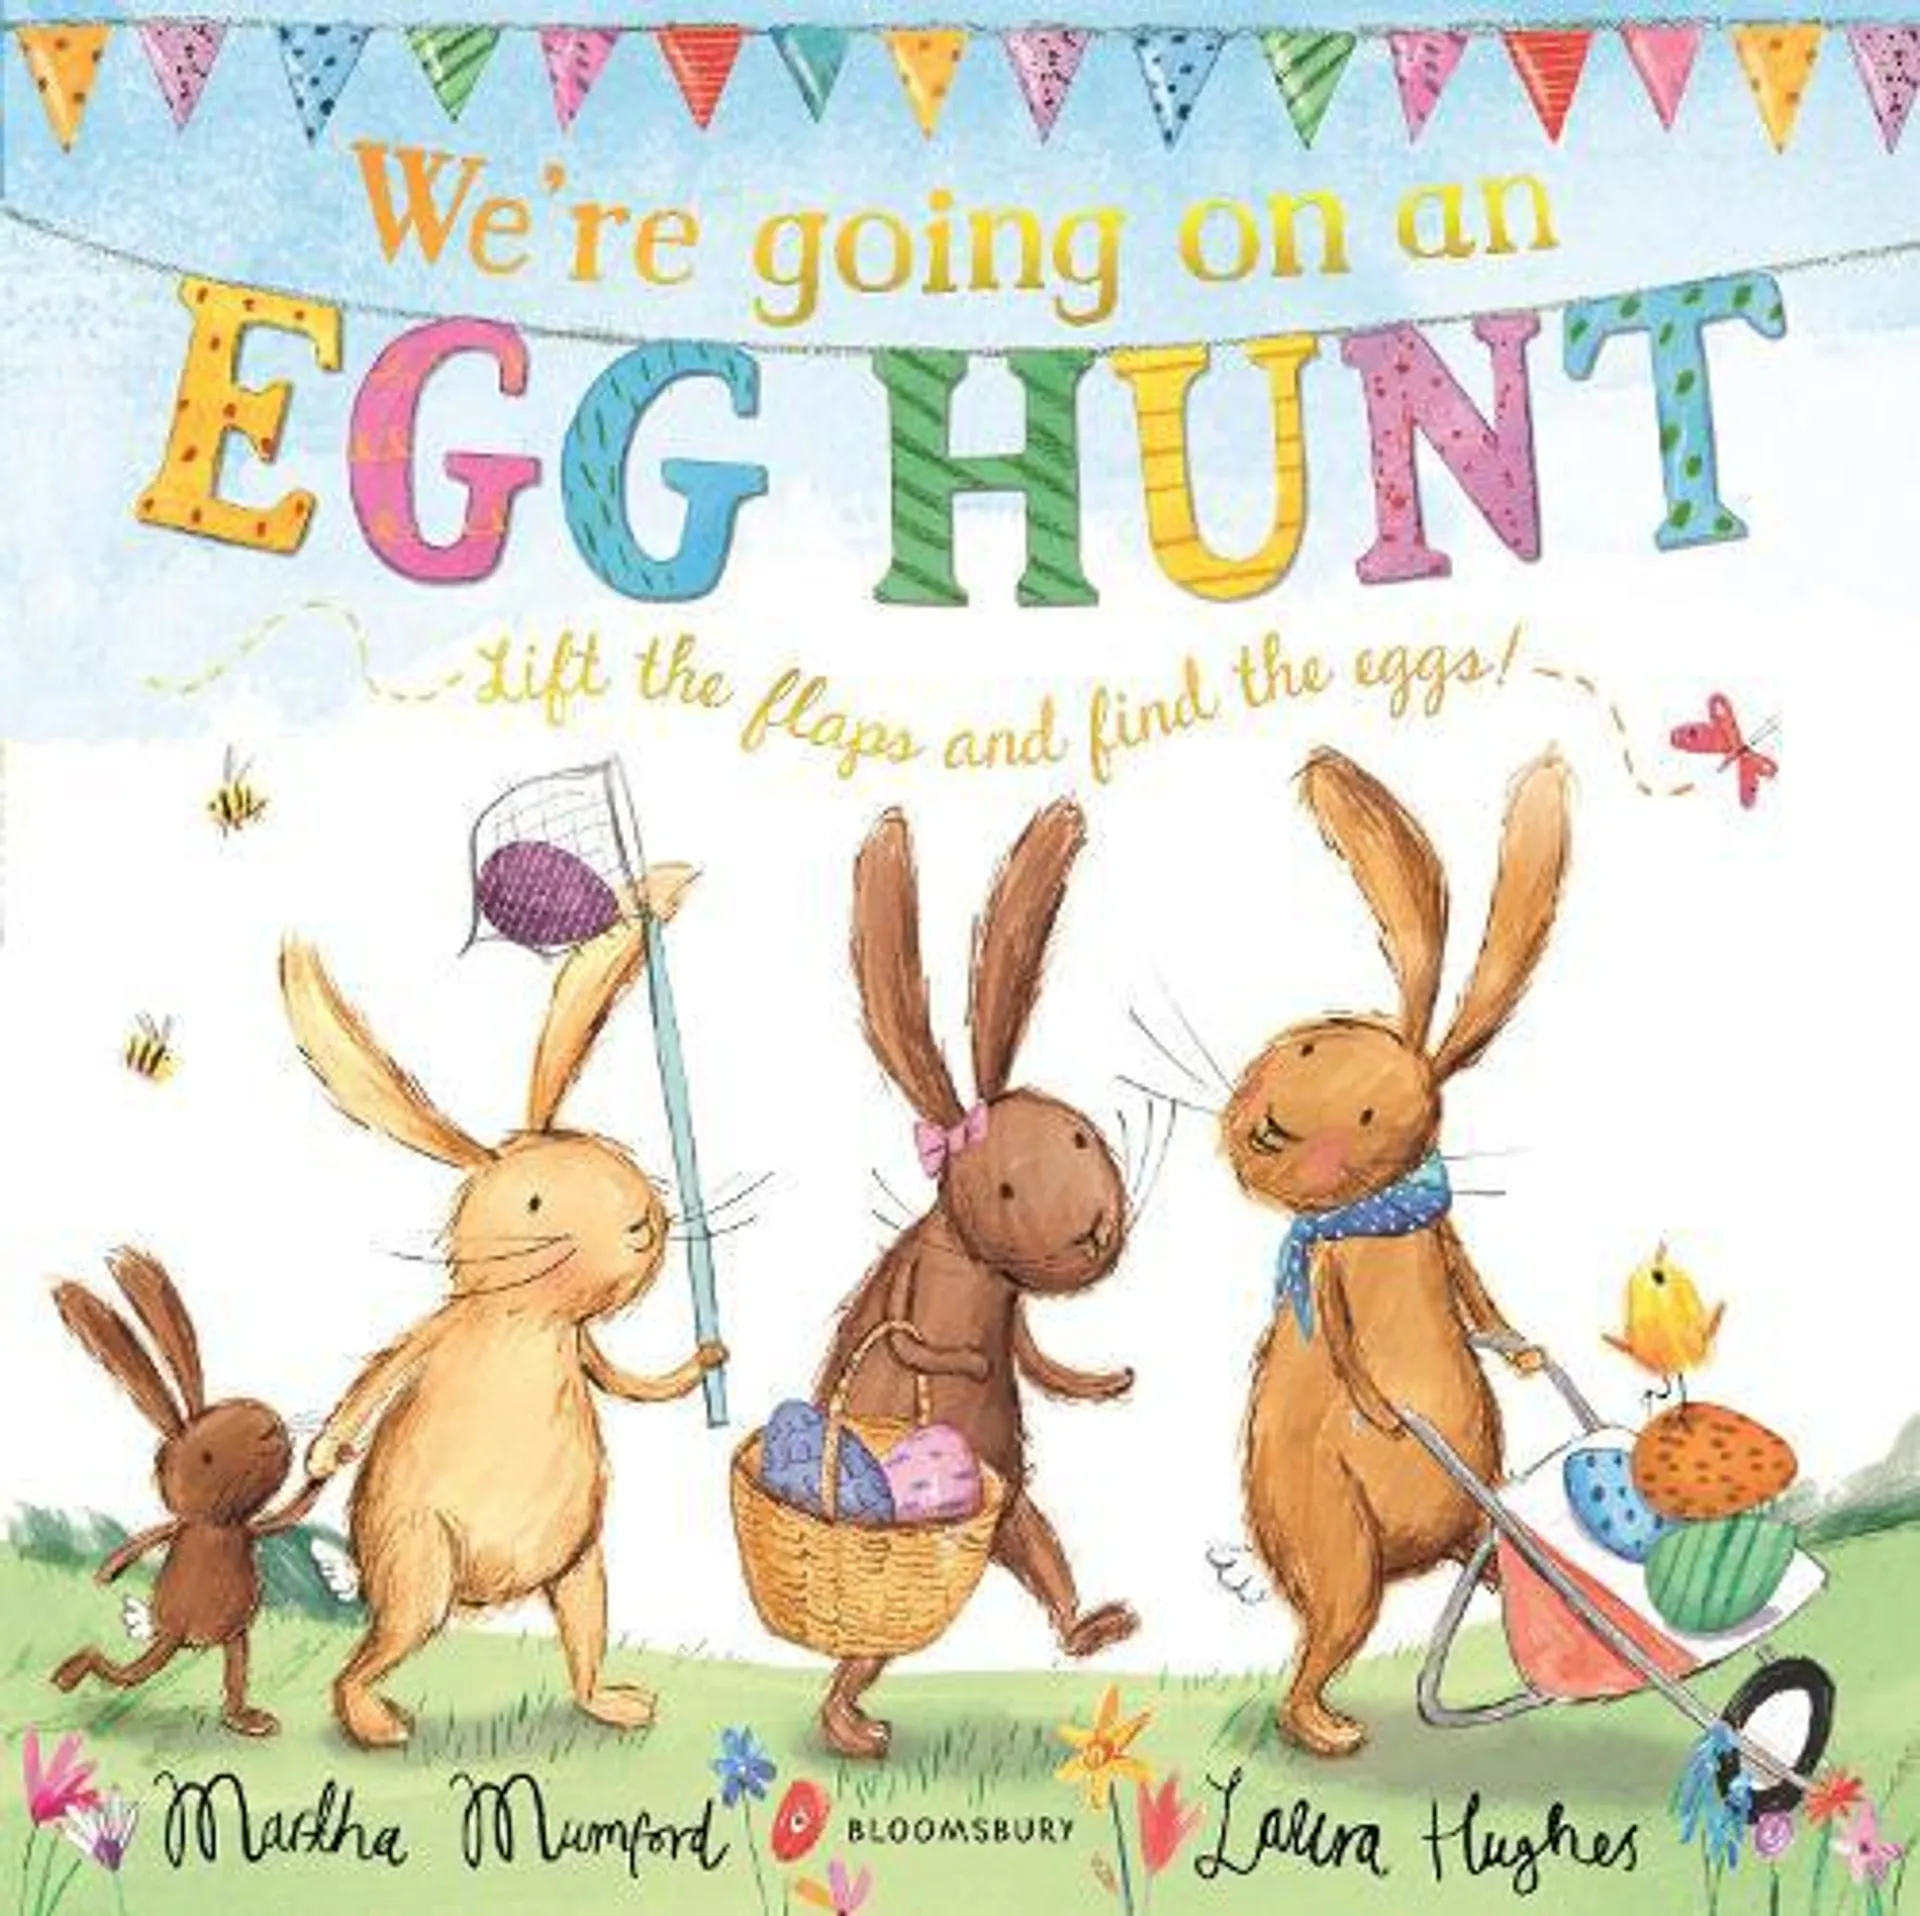 We're Going on an Egg Hunt - The Bunny Adventures (Paperback)